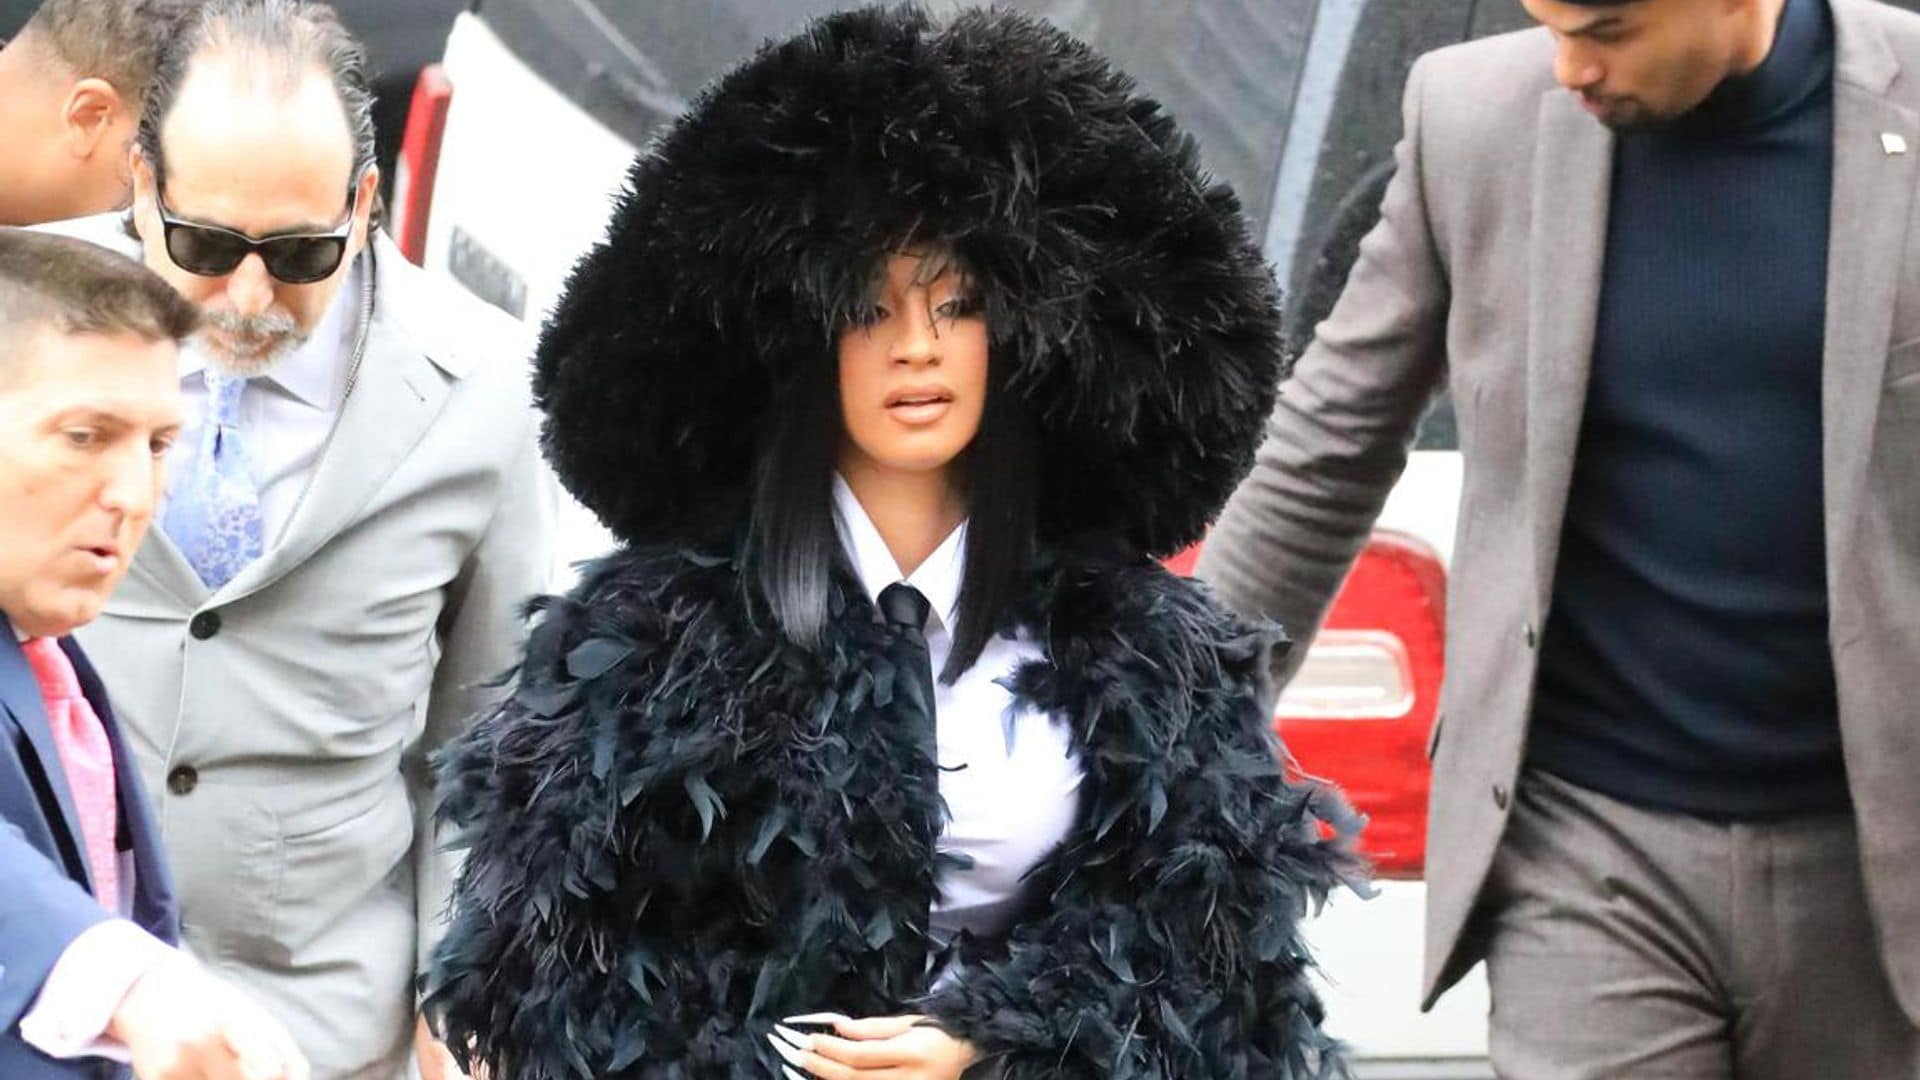 Cardi B’s feathered look to the courthouse is as extra as it gets